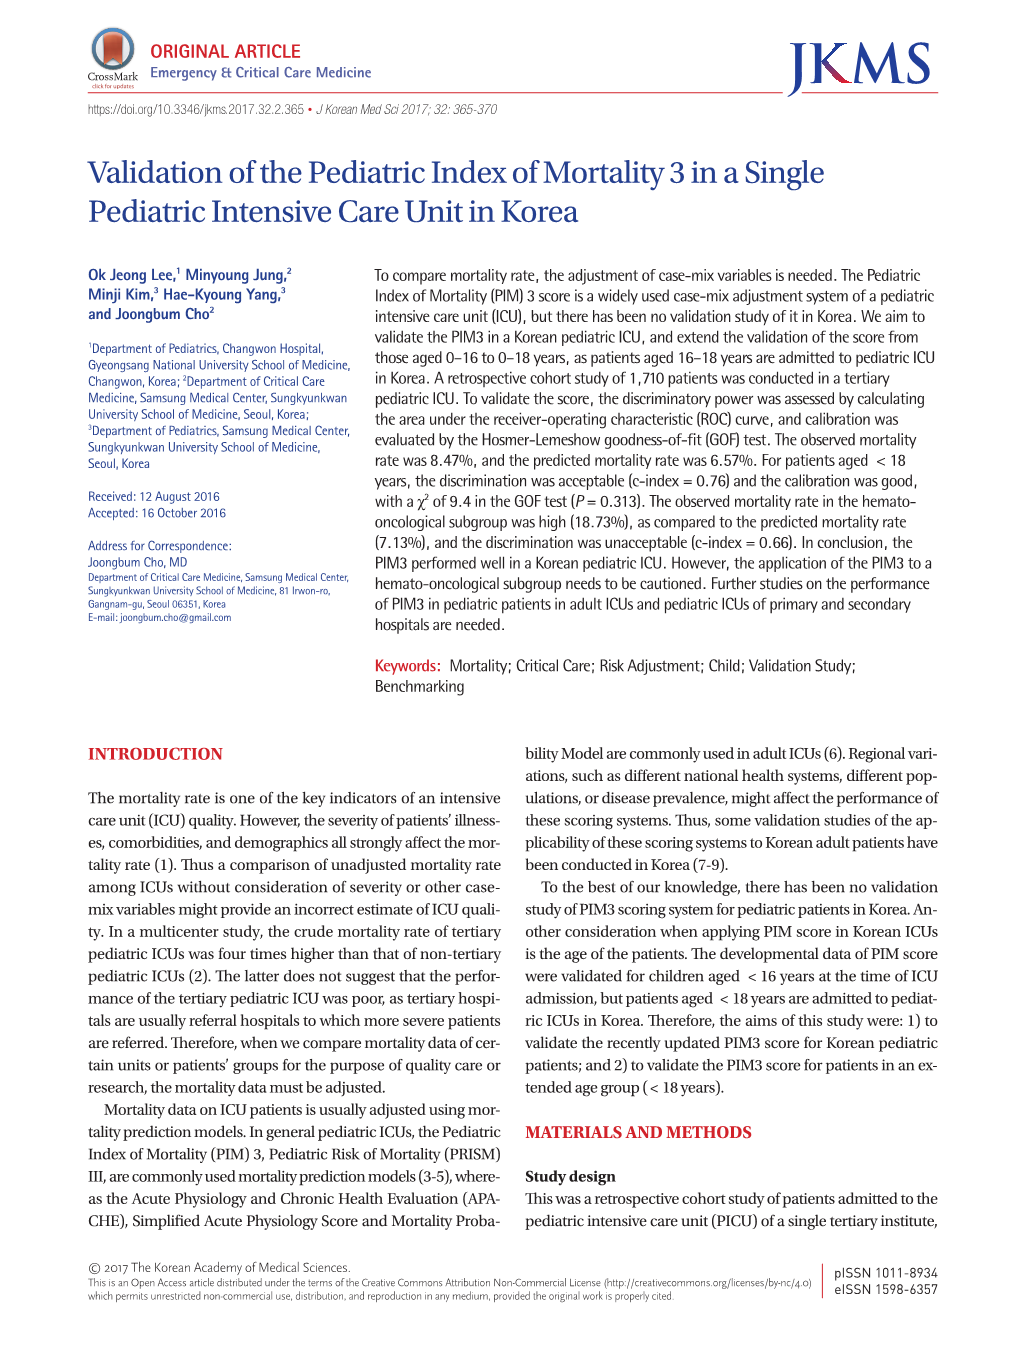 Validation of the Pediatric Index of Mortality 3 in a Single Pediatric Intensive Care Unit in Korea